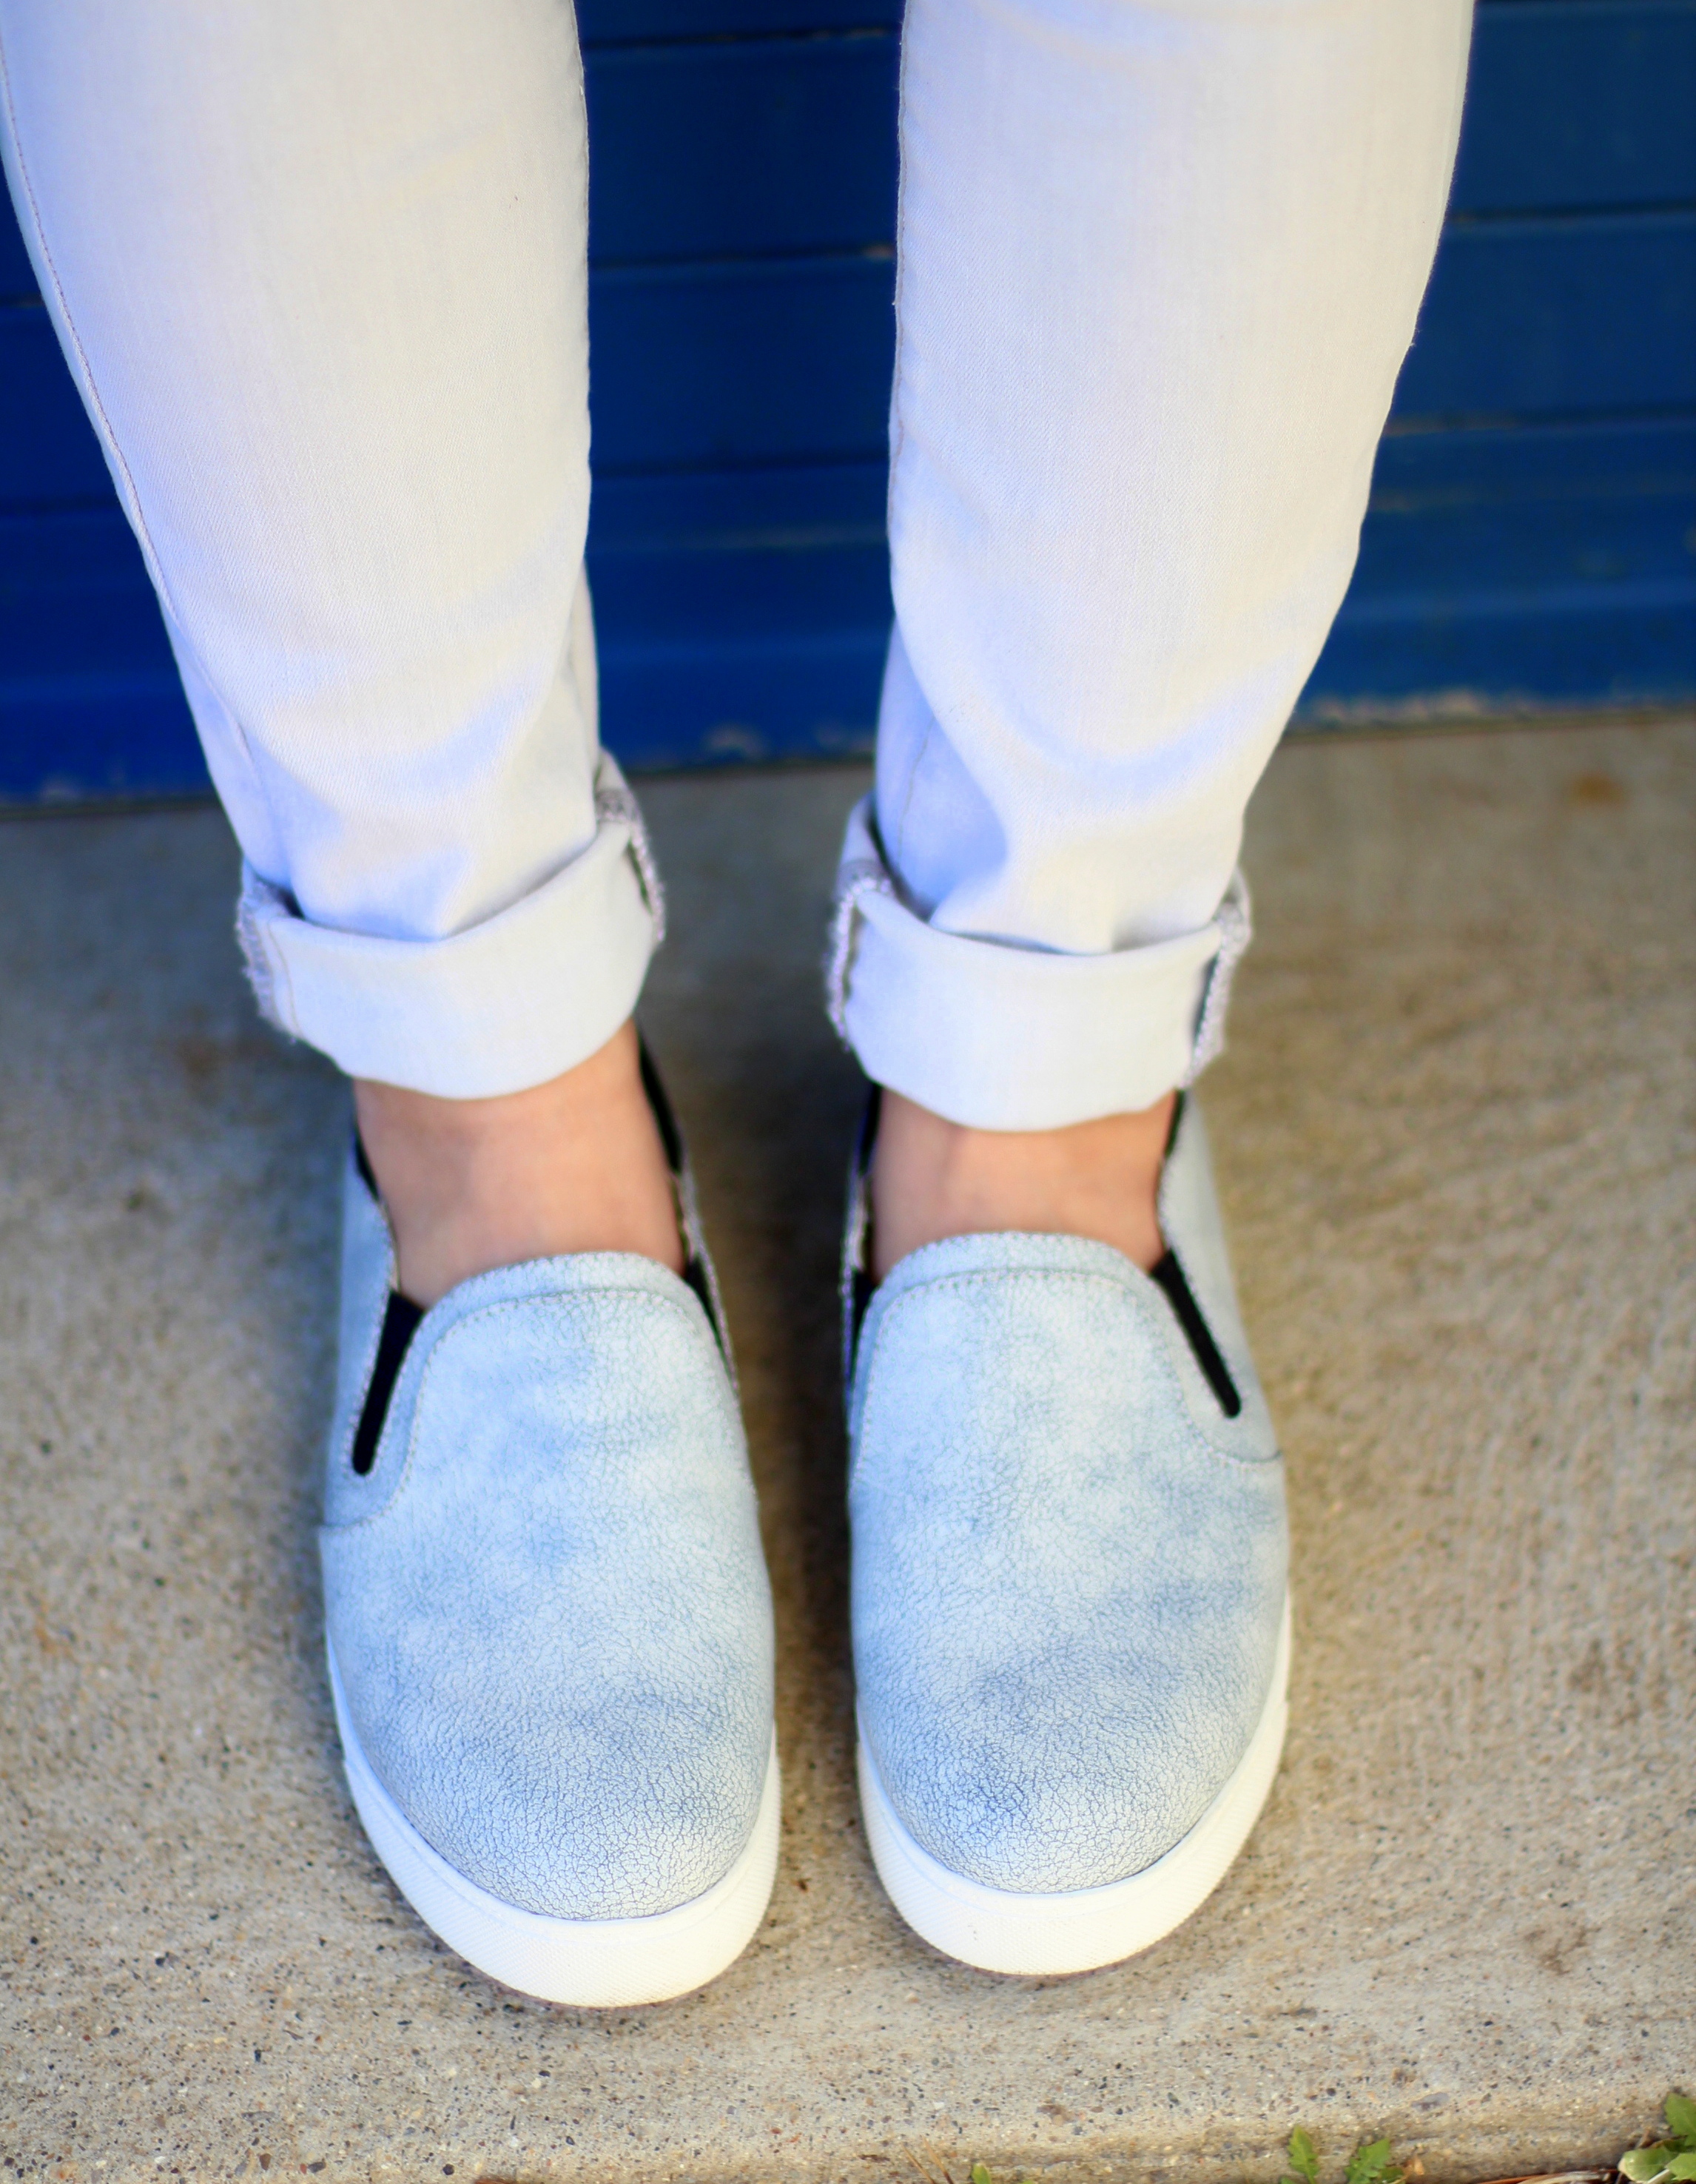 Outfit Highlight: Cool Blues - My Rose Colored Shades